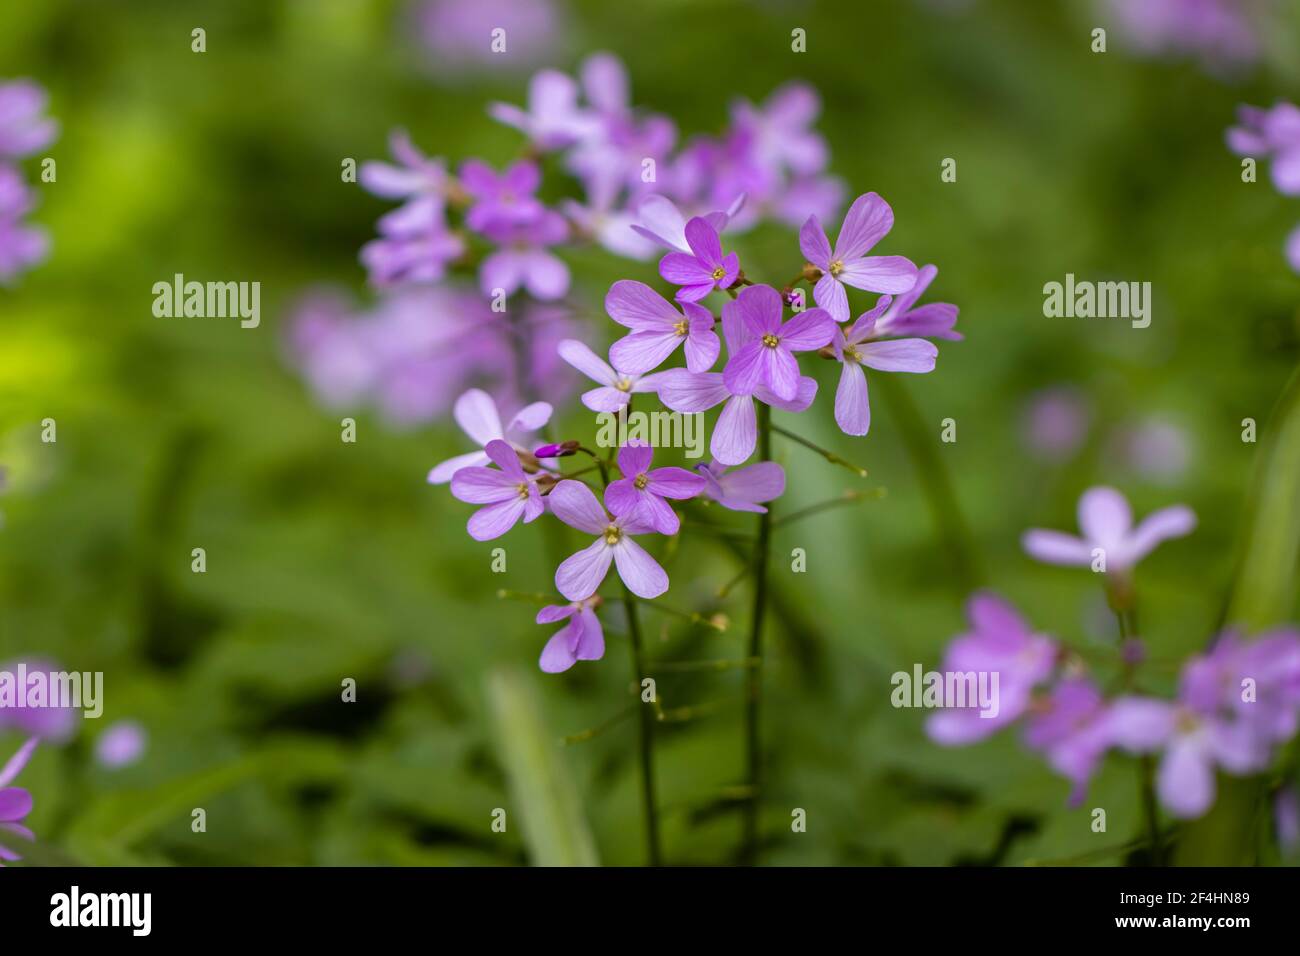 Spring flowering Cardamine quinquefolia (or Dentaria quinquefolia), the five-leaved cuckoo flower, growing in a garden in Surrey, south-east England Stock Photo